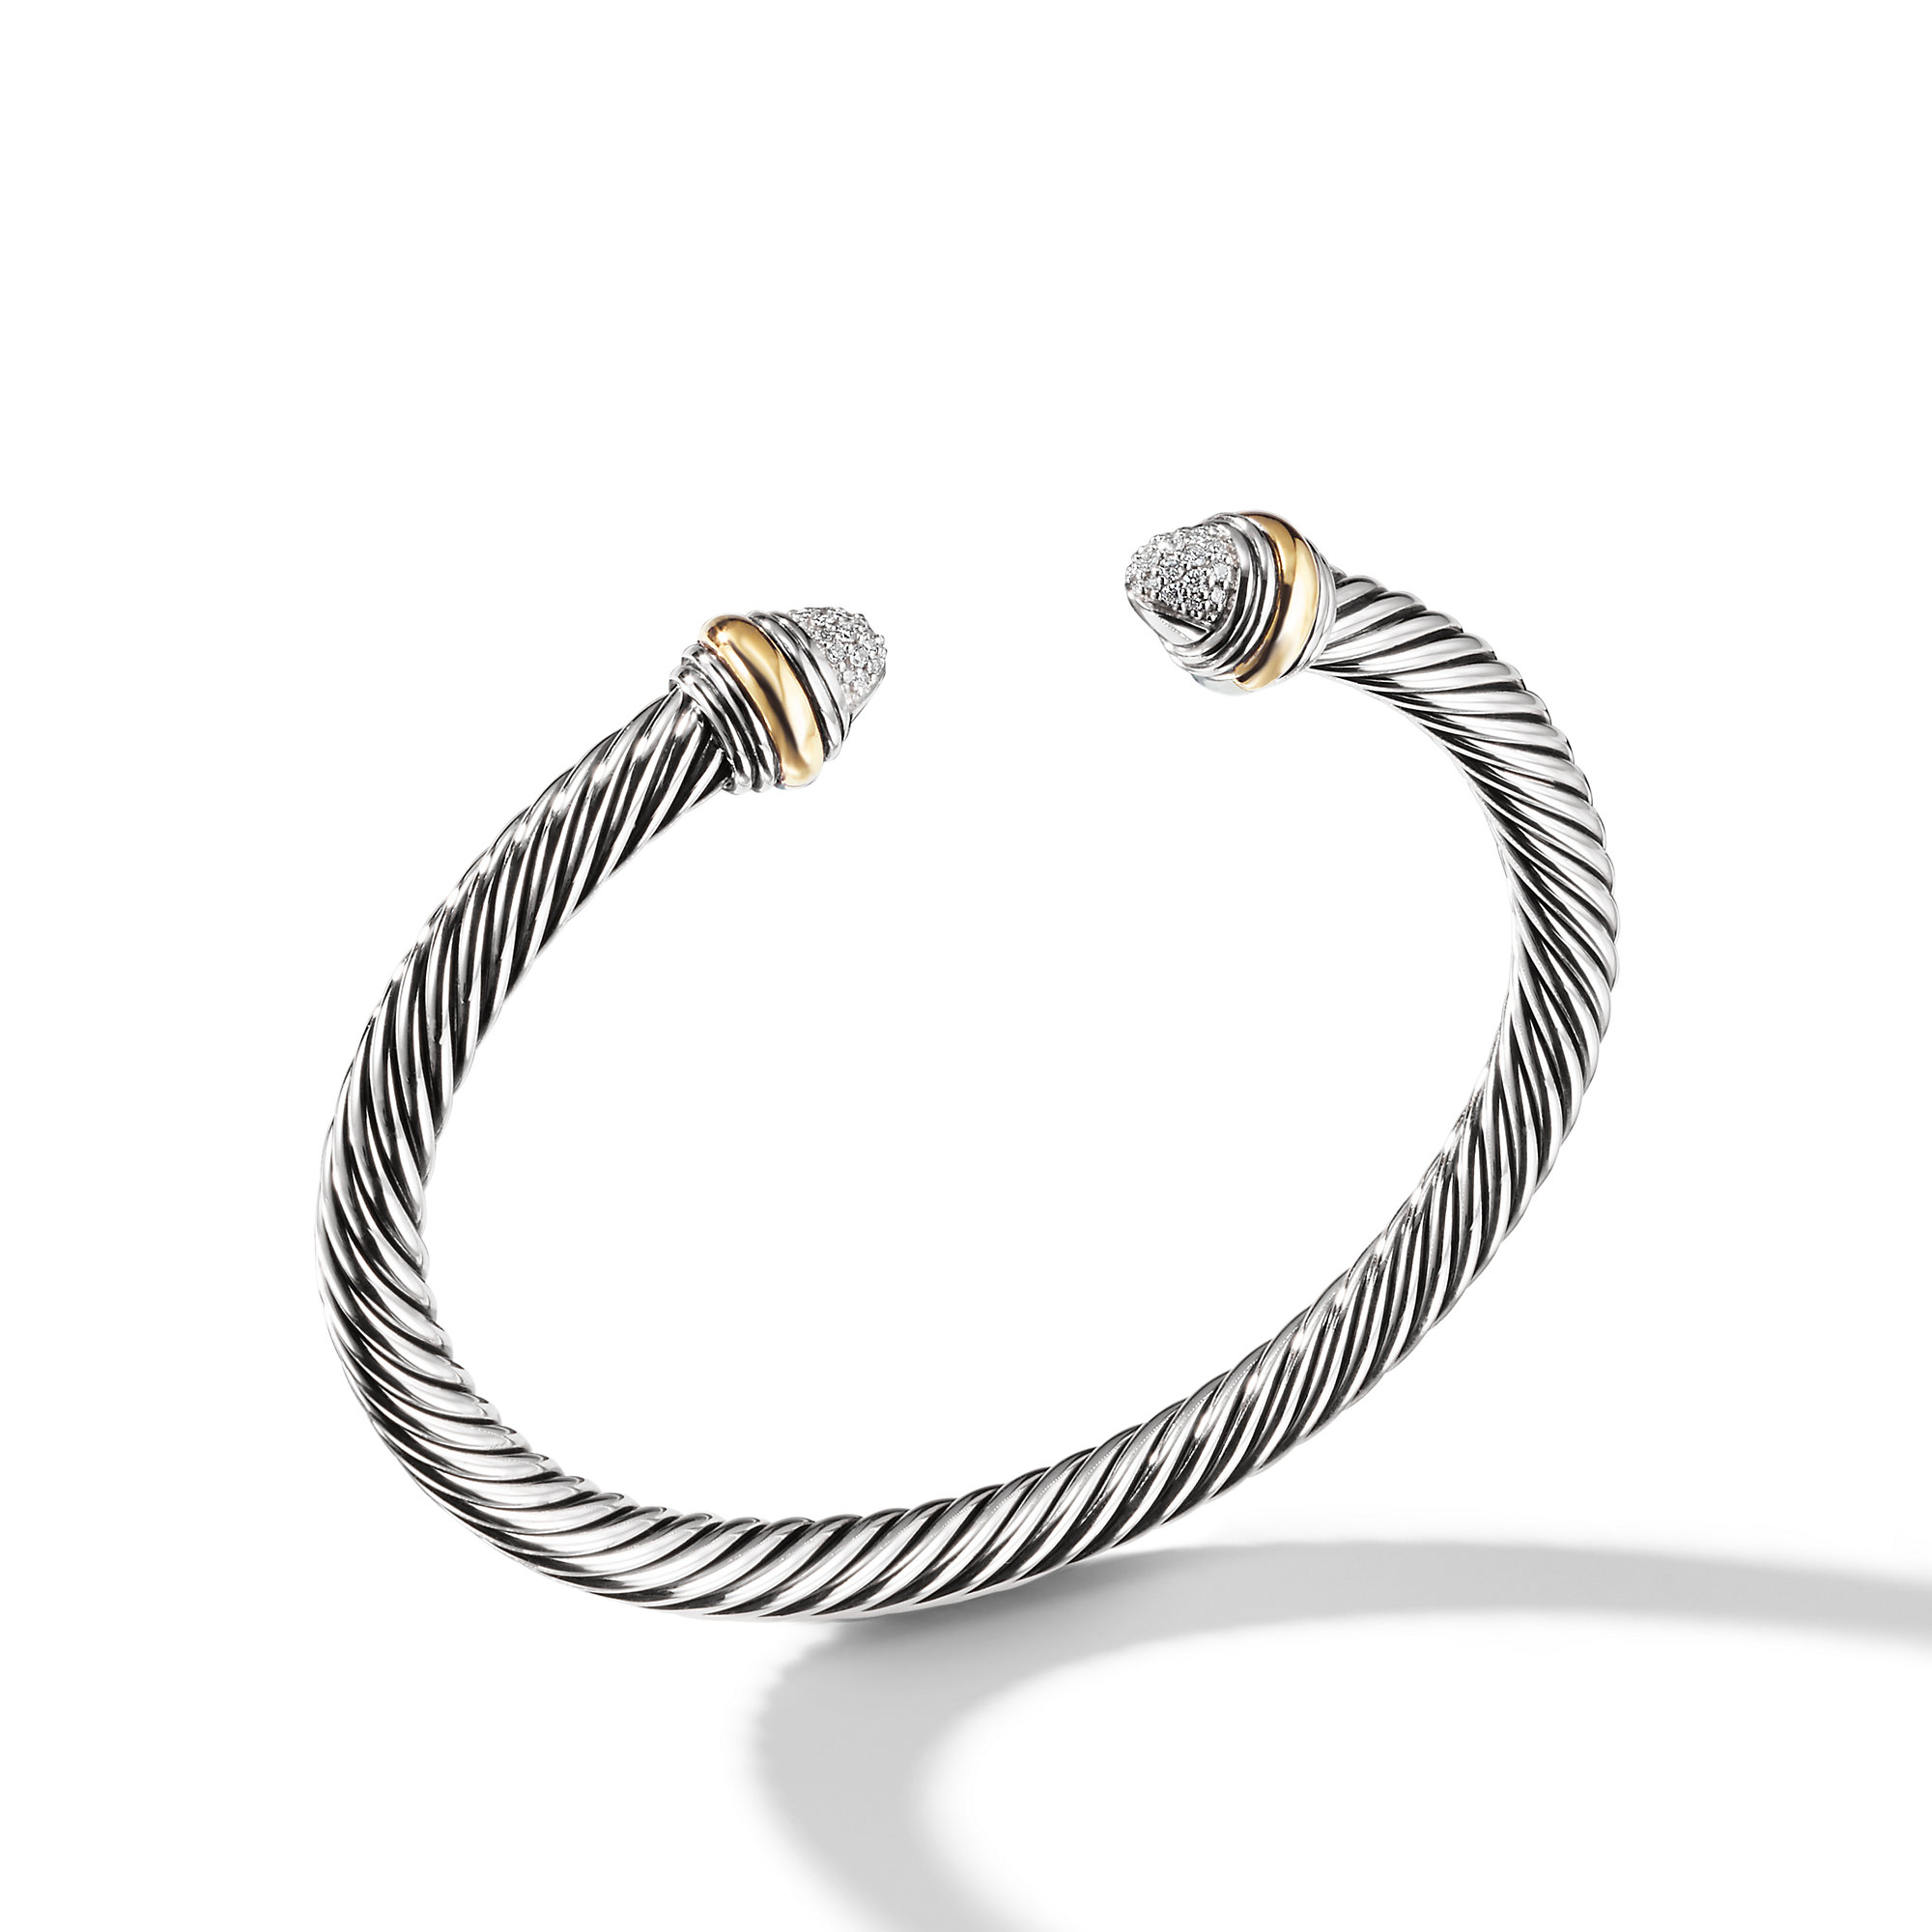 Cable Classics Bracelet in Sterling Silver with Pave Diamond Domes and 14K Yellow Gold